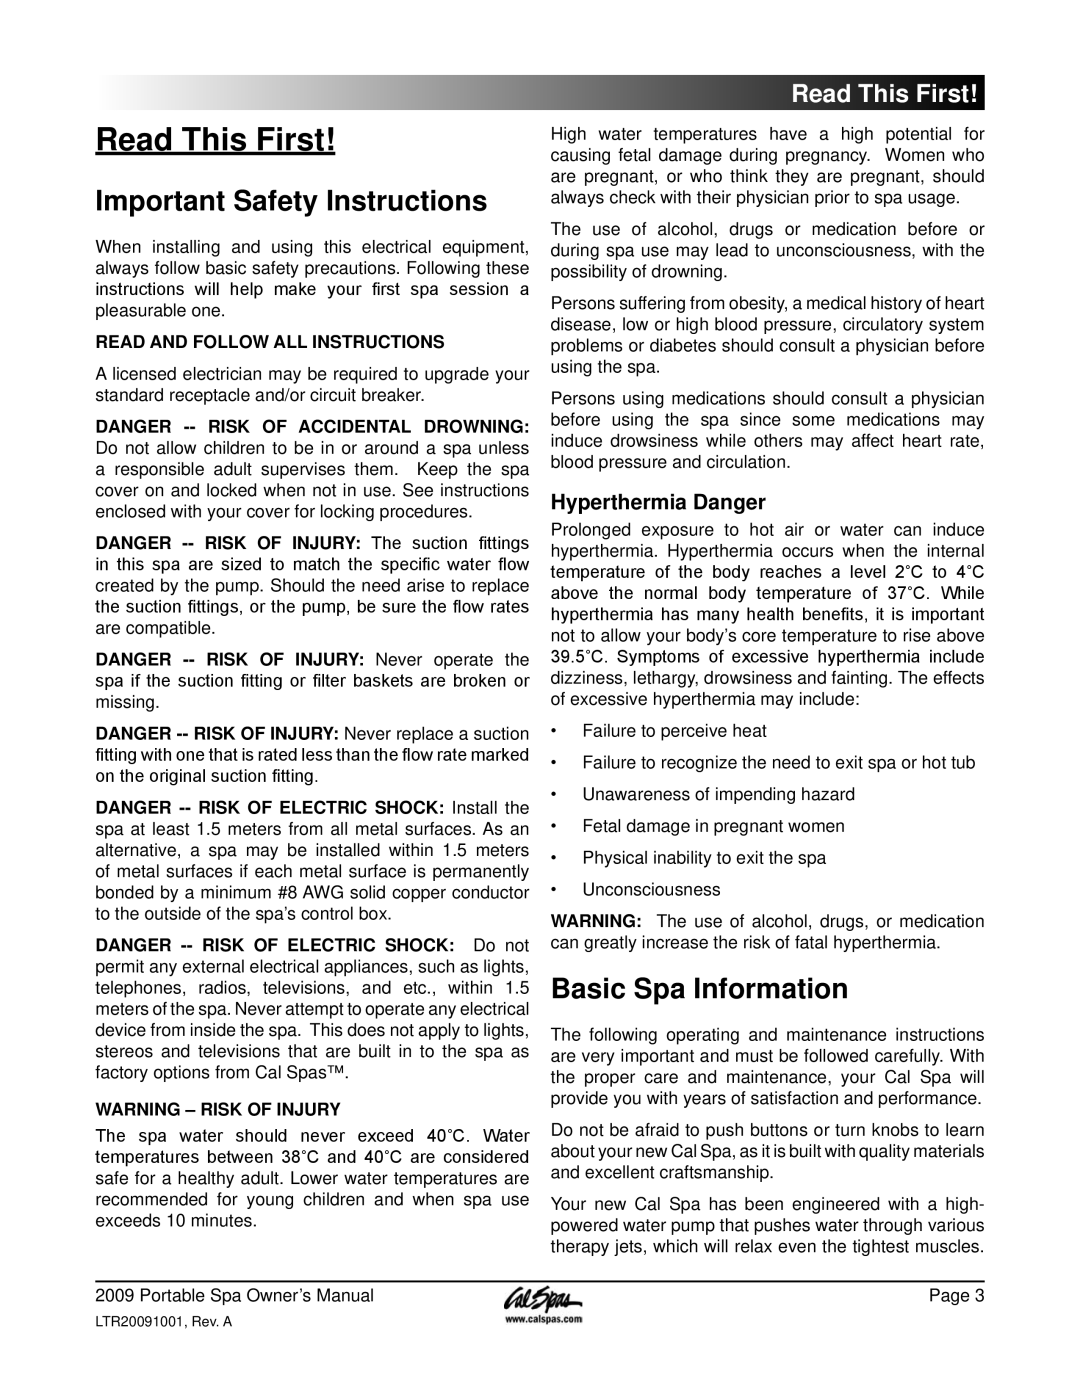 Cal Spas Portable Spas manual Read This First, Important Safety Instructions, Basic Spa Information, Hyperthermia Danger 